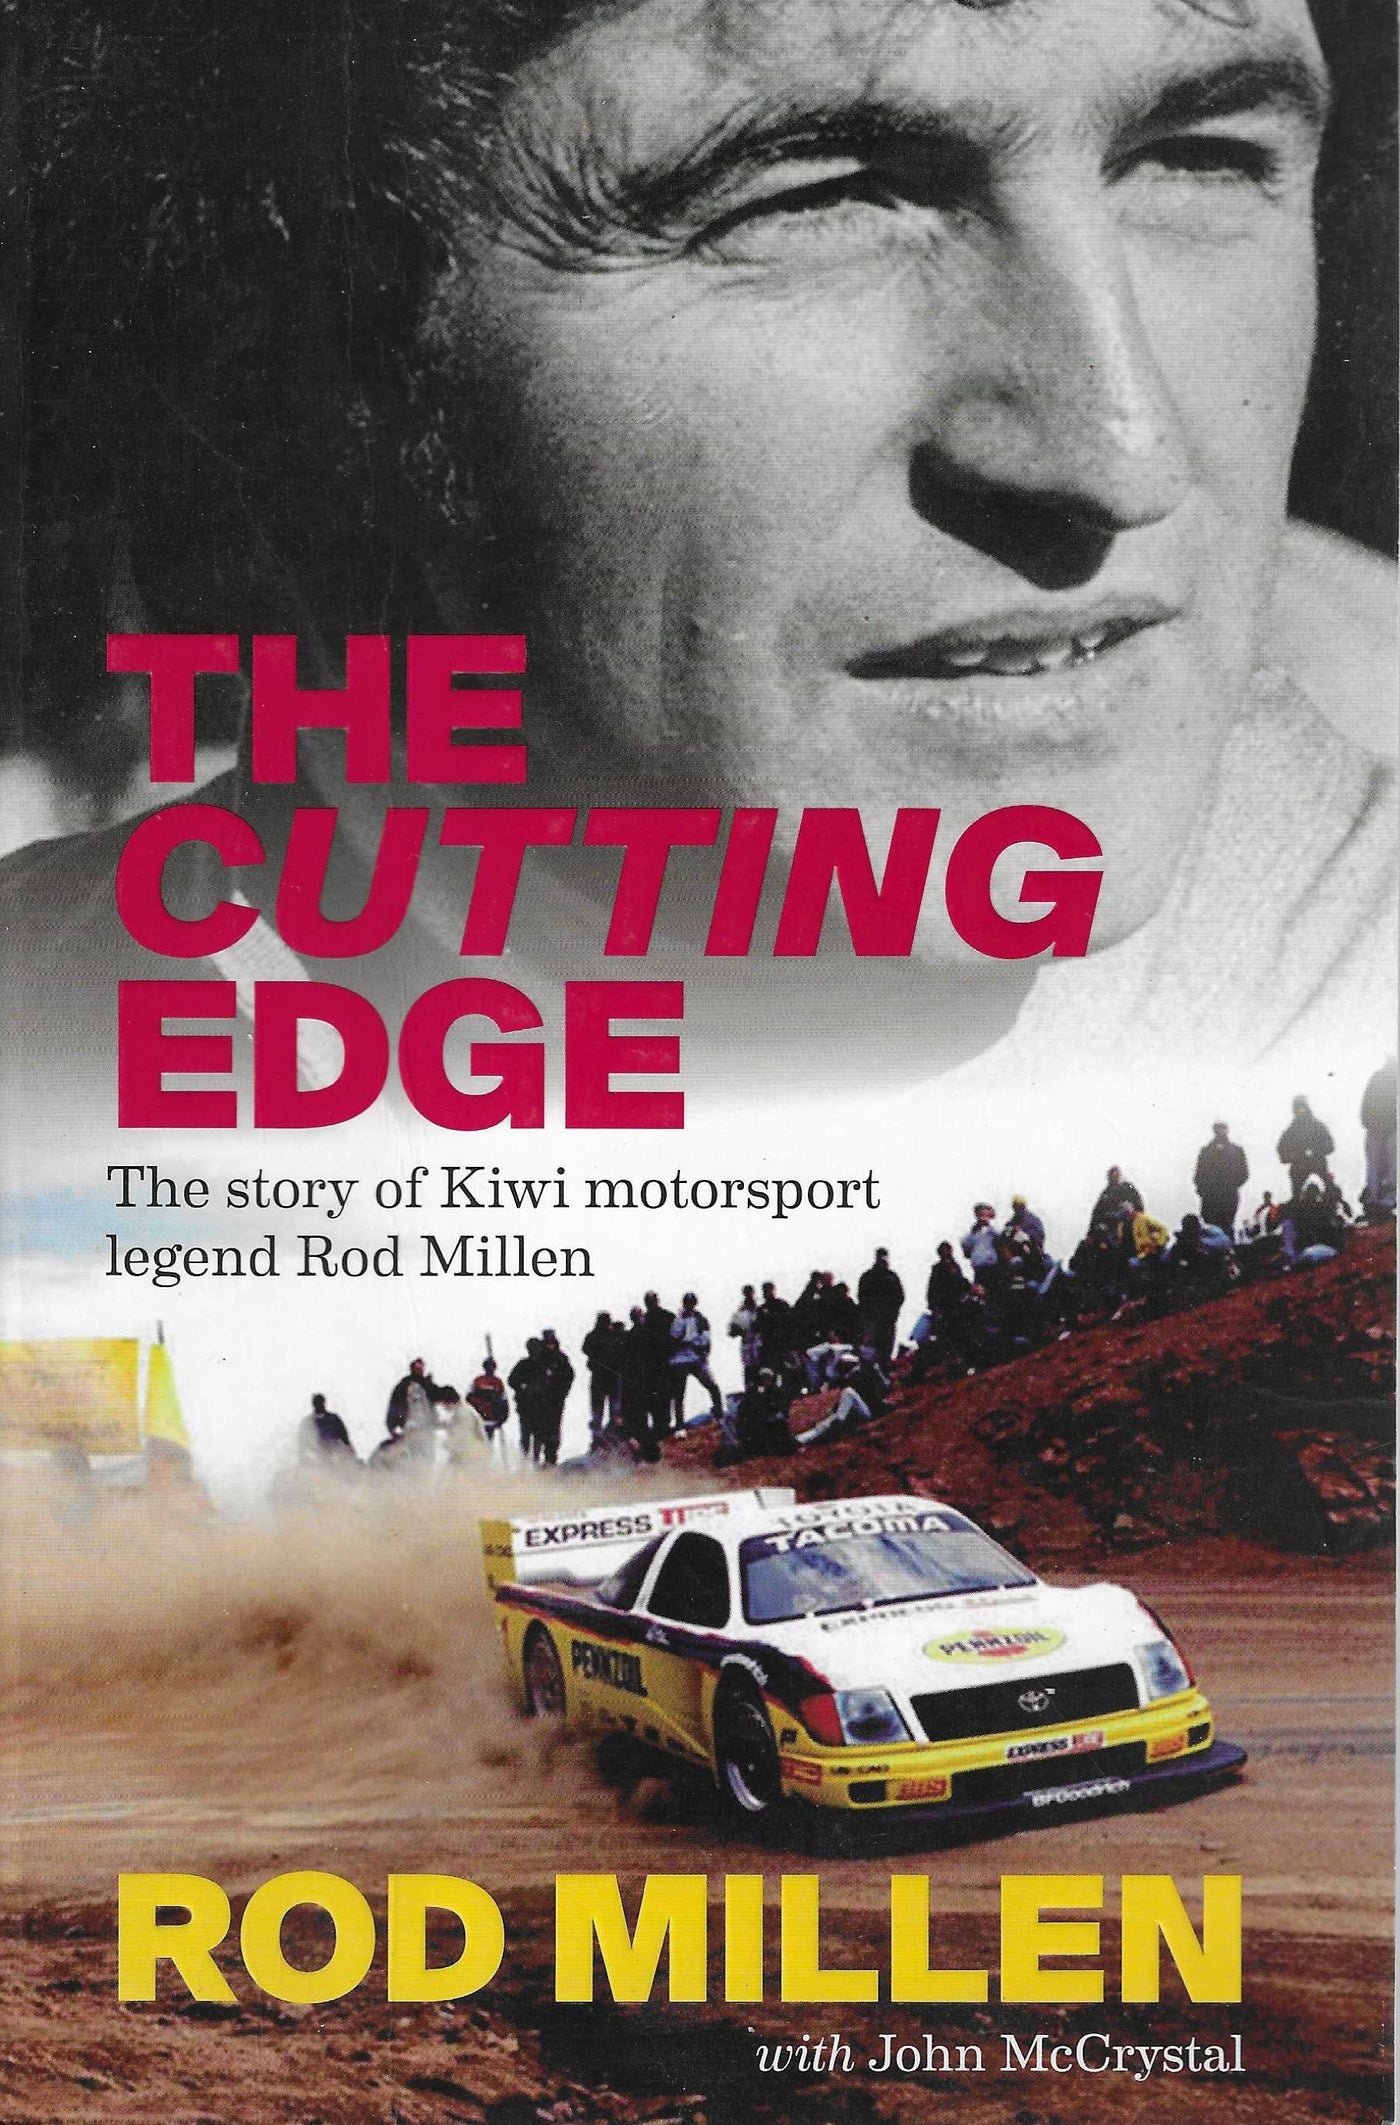 The Cutting Edge by Rod Millen